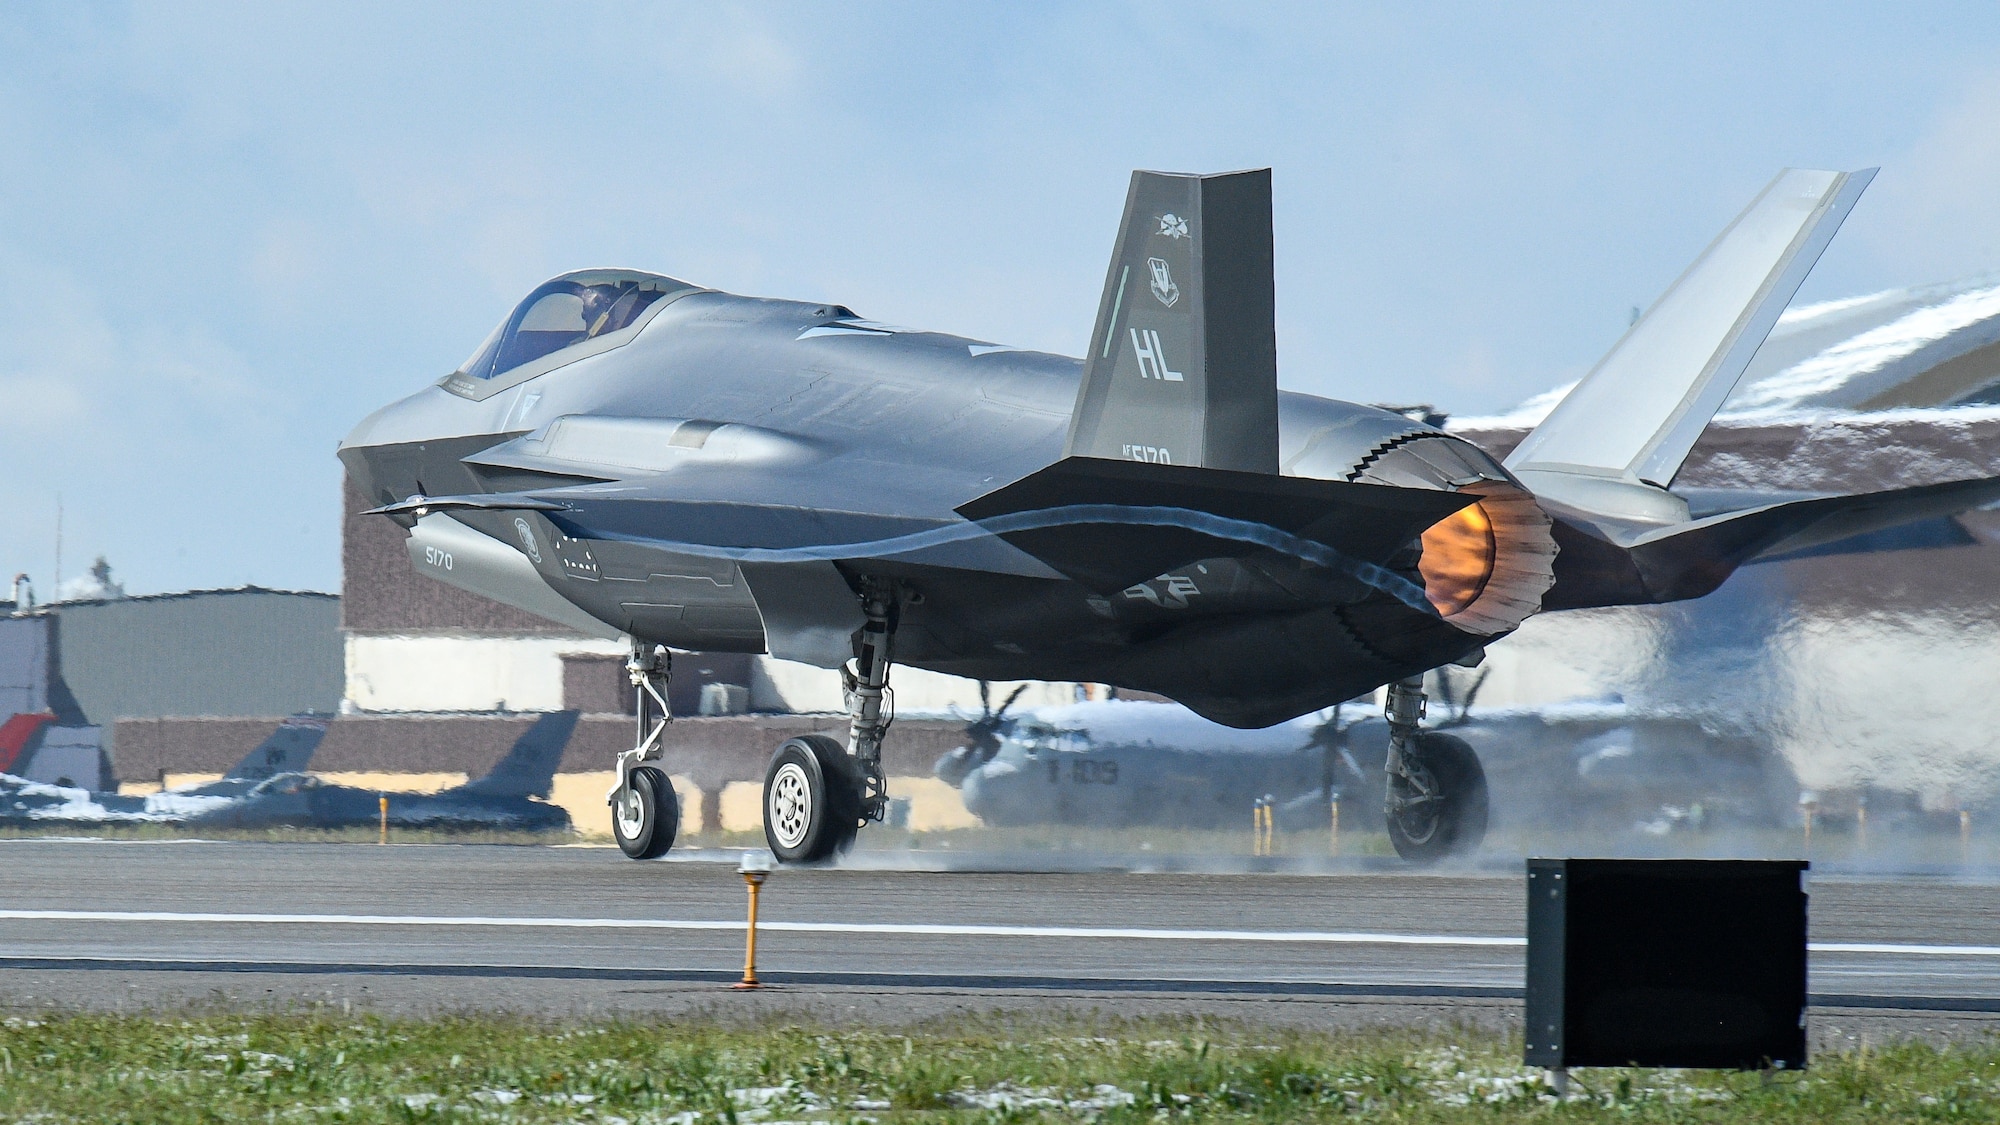 An F-35A takes off during a combat exercise at Hill Air Force Base, Utah, May 1, 2019. The active duty 388th Fighter Wing and Reserve 419th Fighter Wing, along with F-16 units from Holloman AFB, New Mexico, and Kunsan Air Base, Korea, conducted an integrated combat exercise where maintainers were tasked to continually provide ready aircraft and pilots took off in waves to simulate a large force engagement with enemy aircraft. (U.S. Air Force photo by R. Nial Bradshaw)